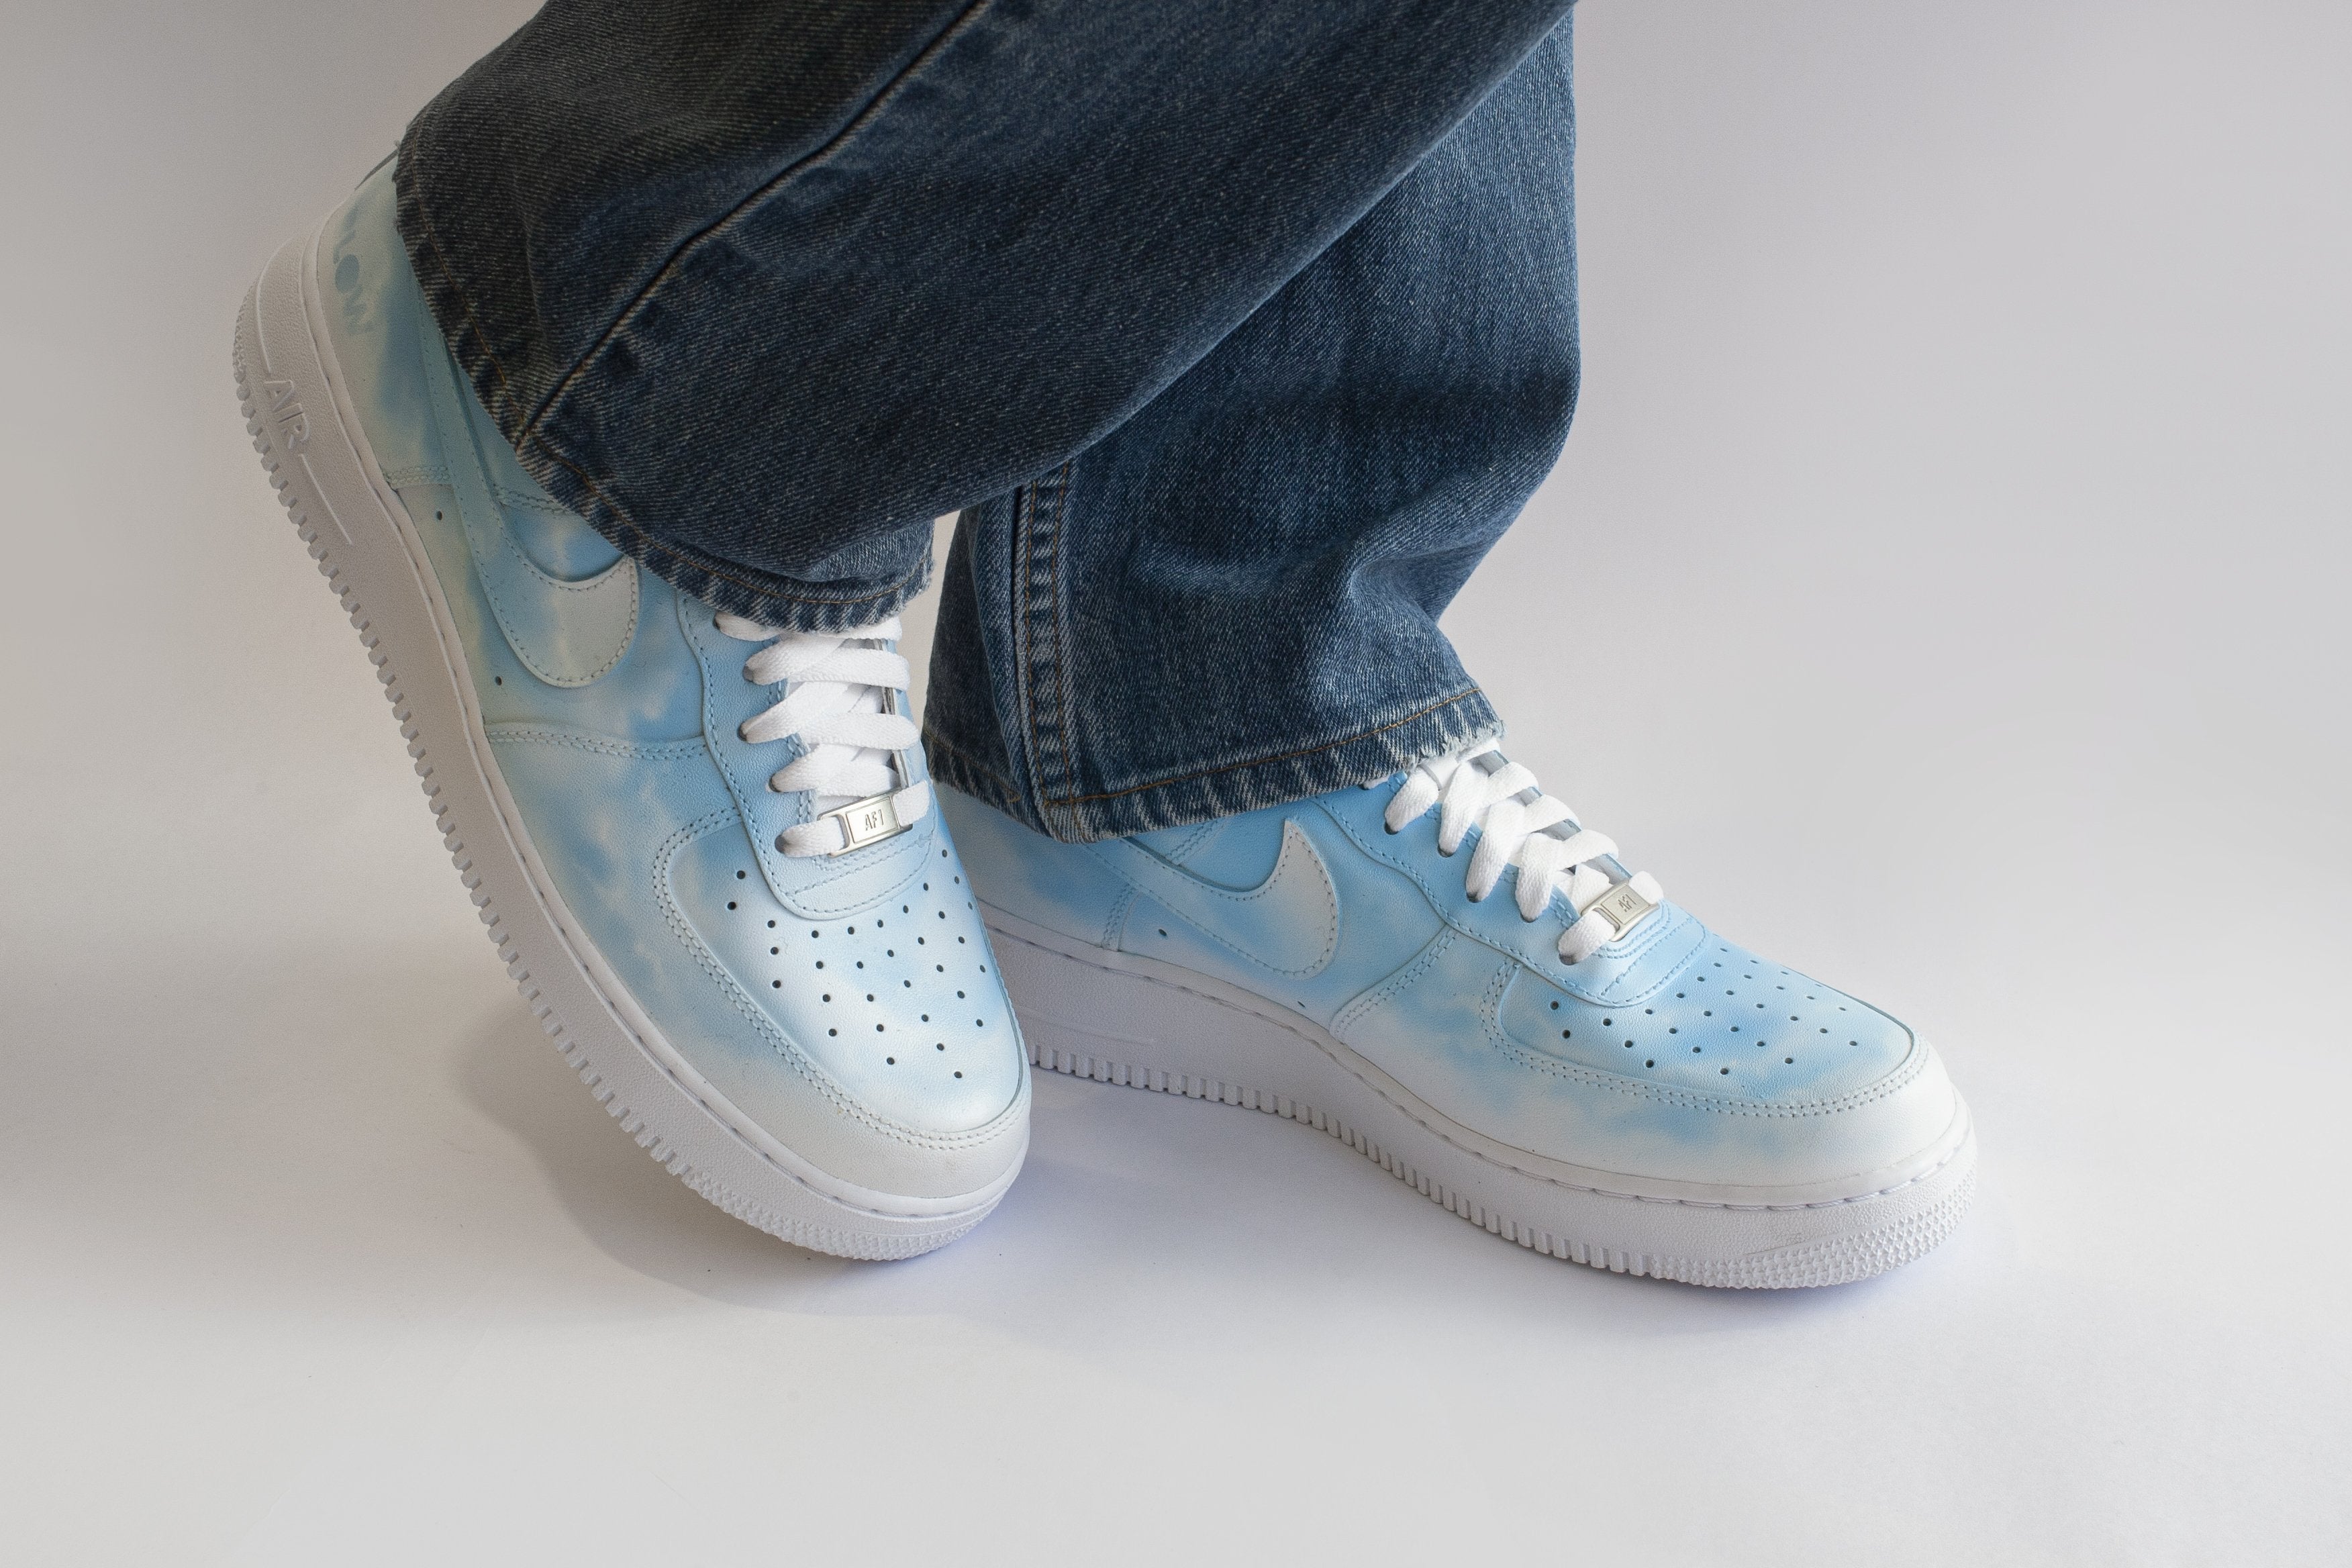 The Louis Vuitton x Nike Air Force 1's Covert Journey to the Resell Market